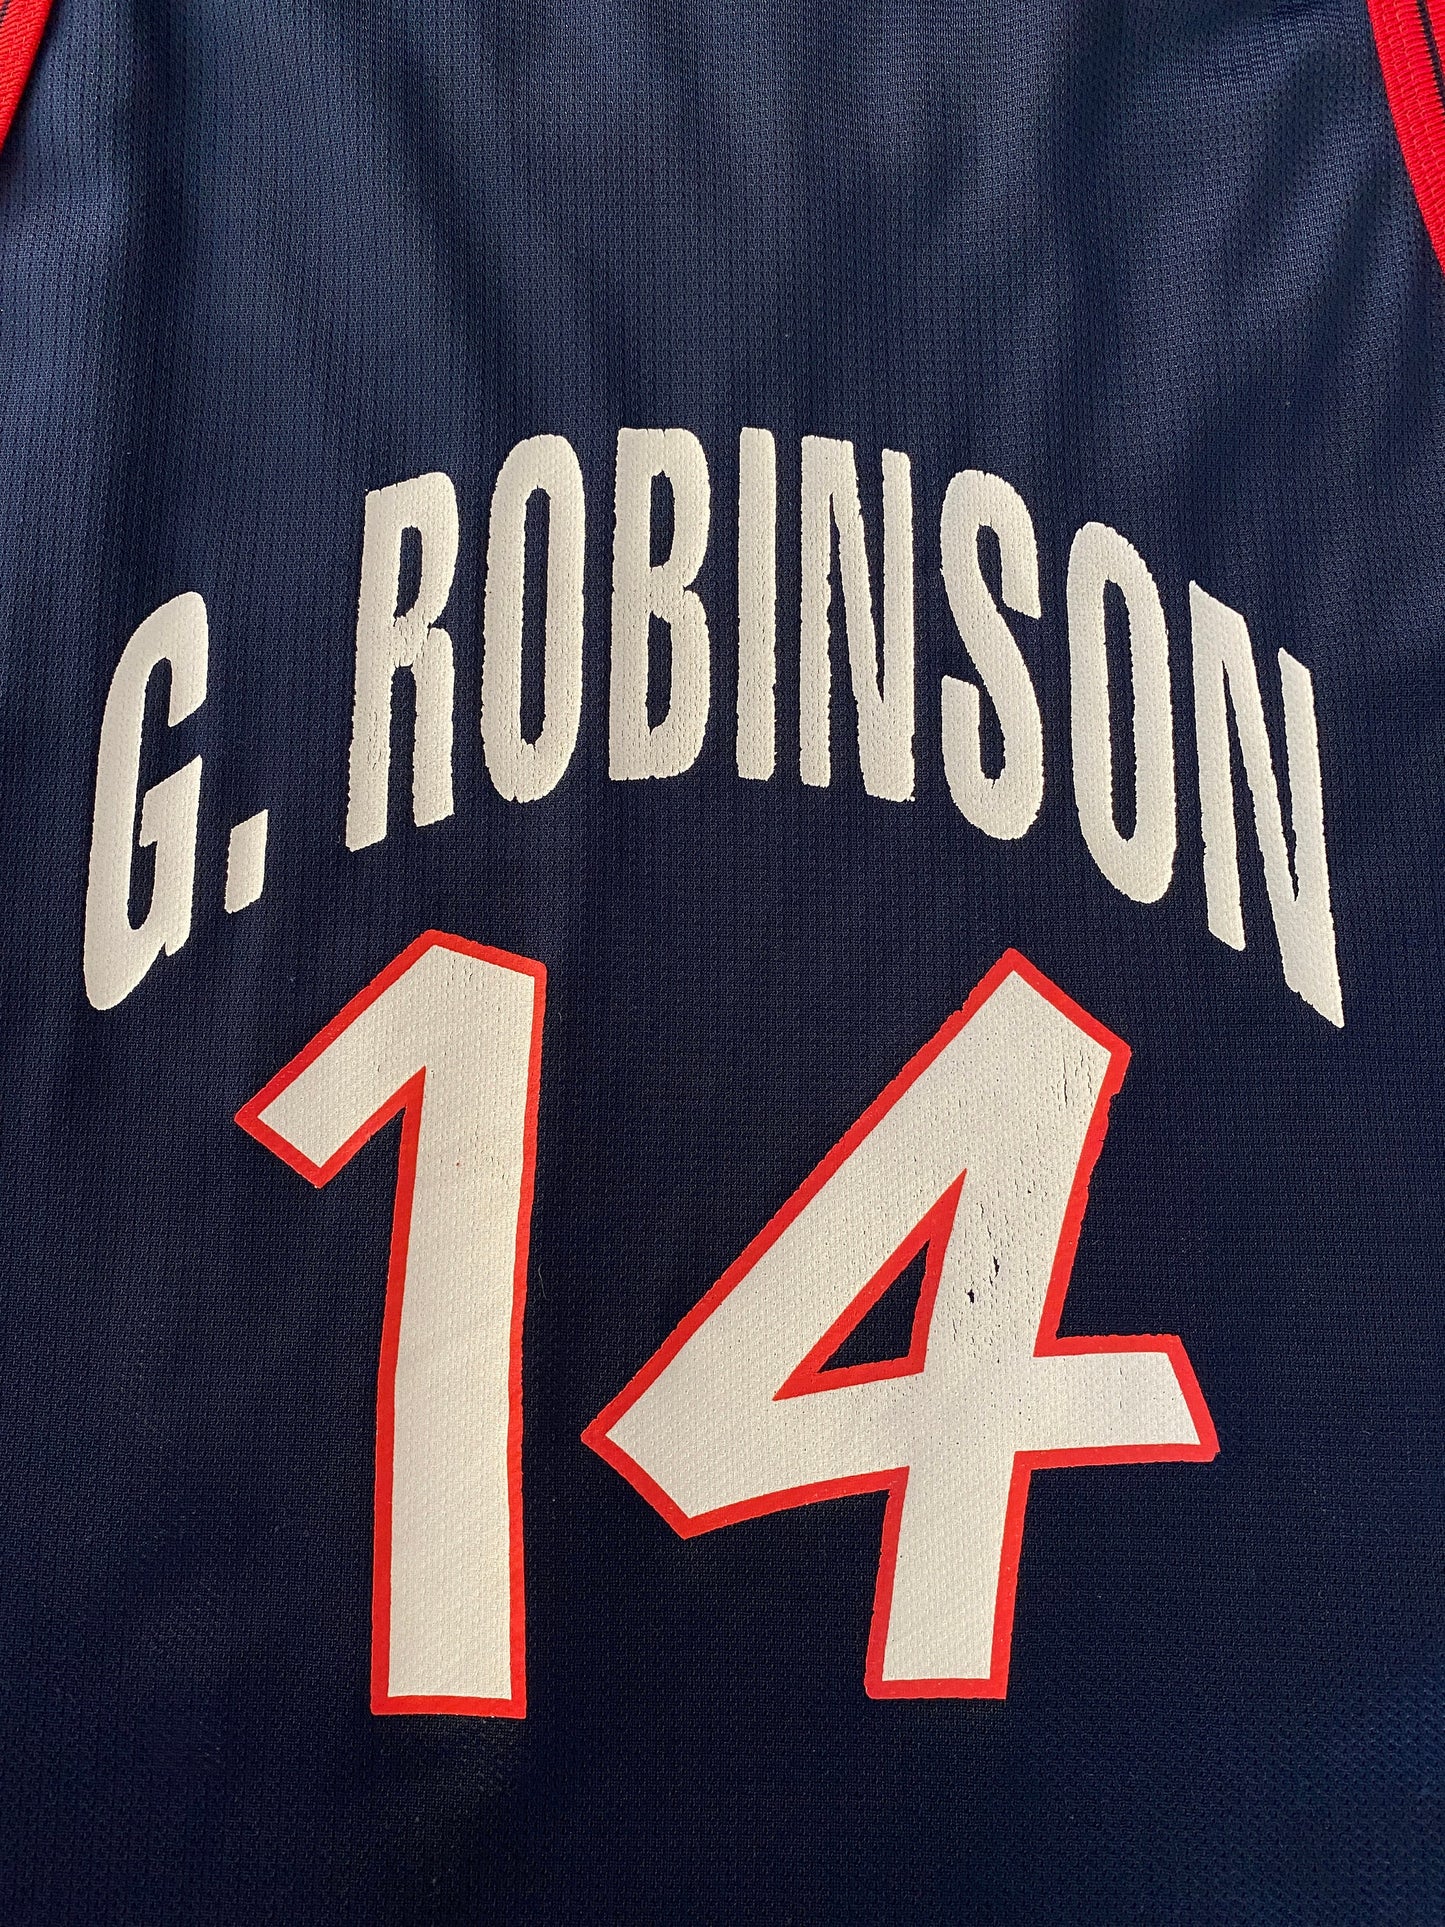 Size 48 David Robinson #14 Vintage Dream Team Olympic Champion NBA Jersey - Made in USA - front View